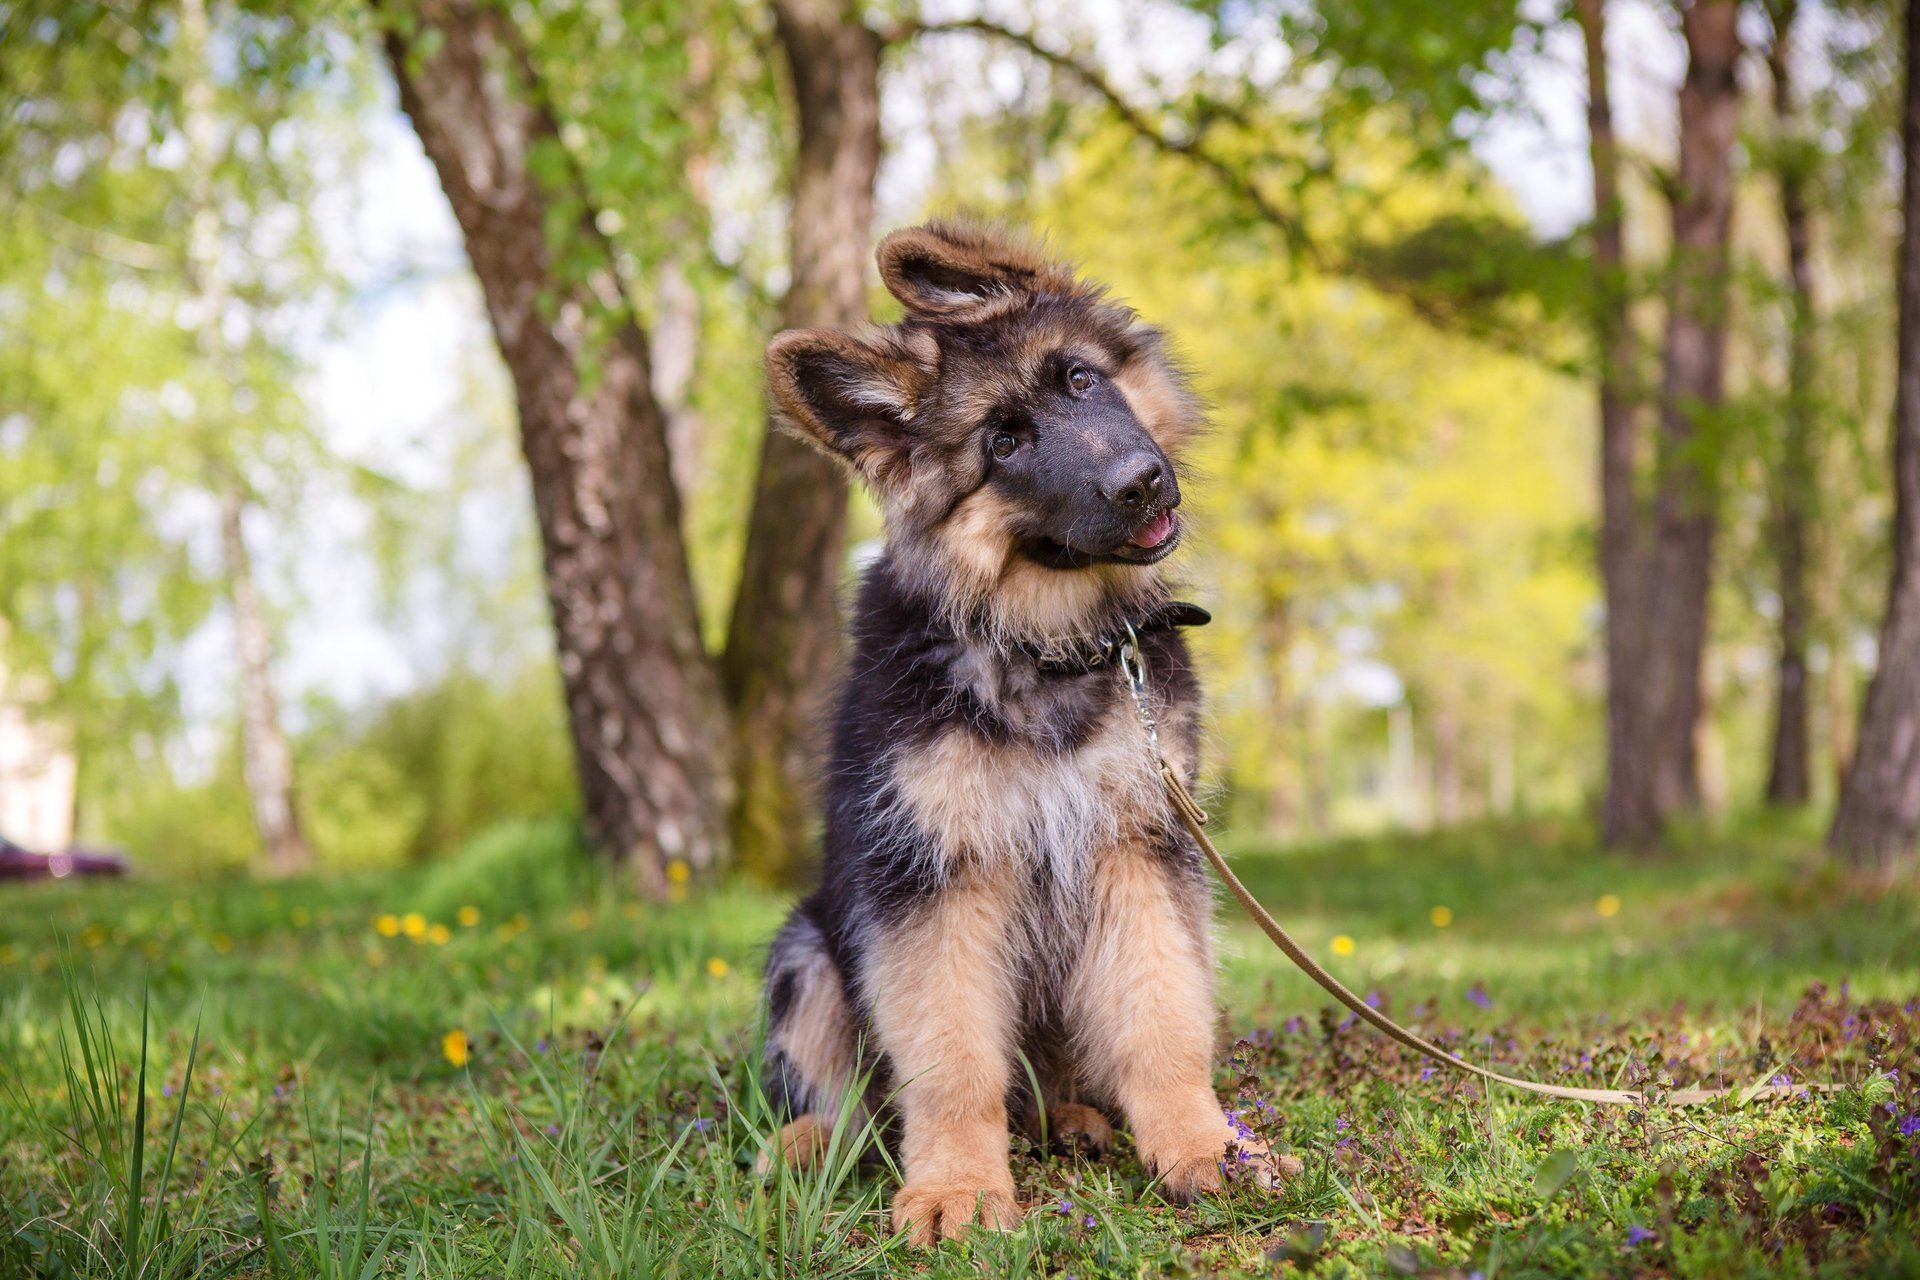 Puppy Training Tips for a Well-Behaved Companion